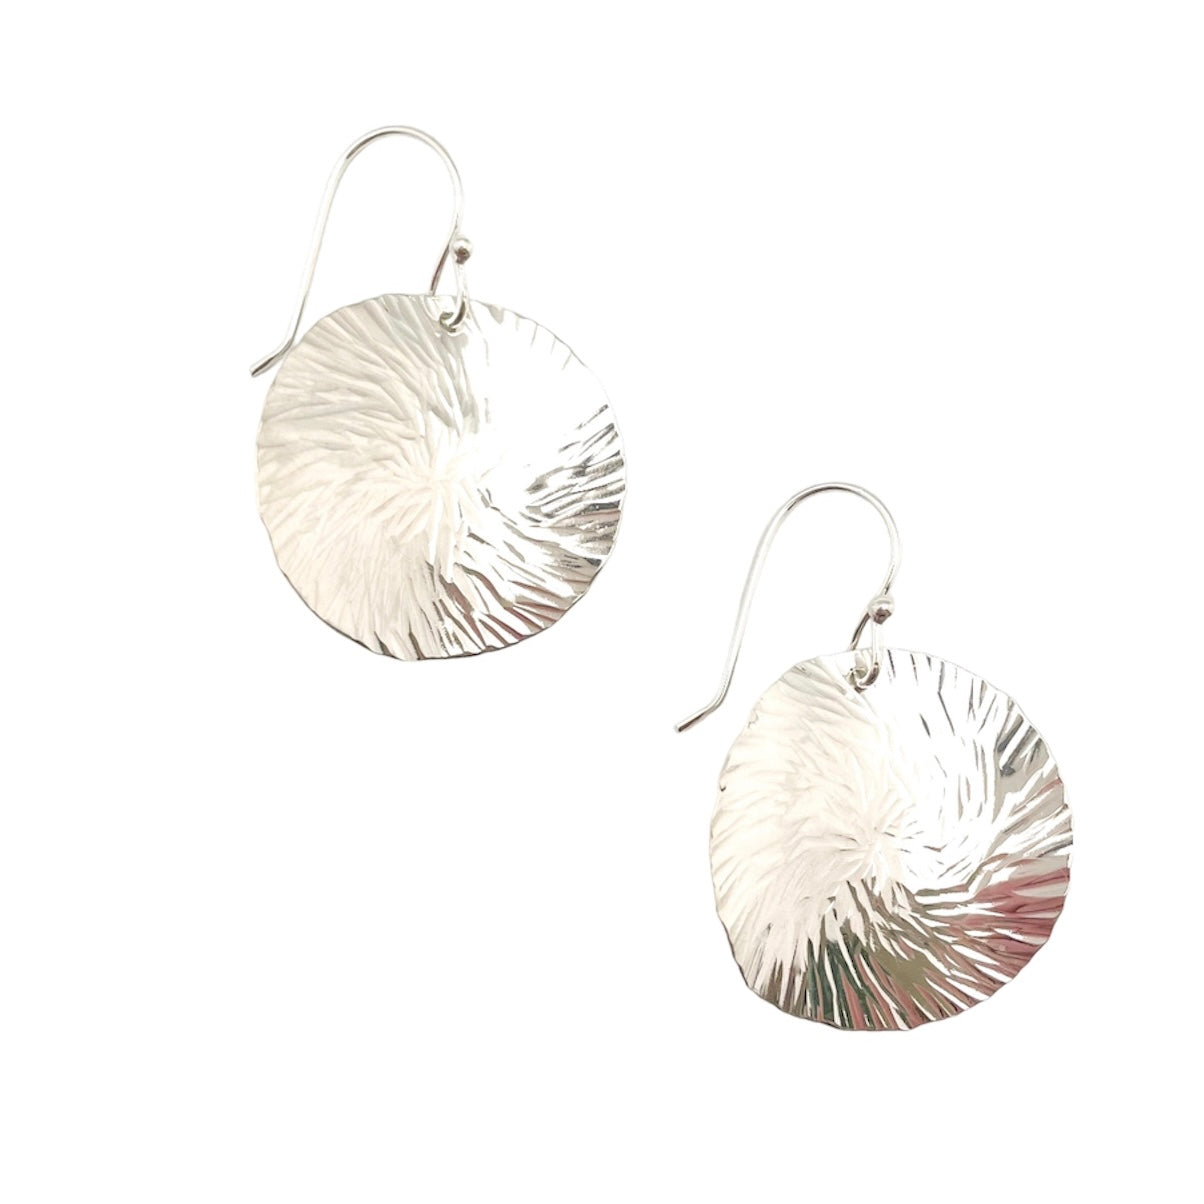 STERLING SILVER CURVED TEXTURED SHINY DISC EARRINGS